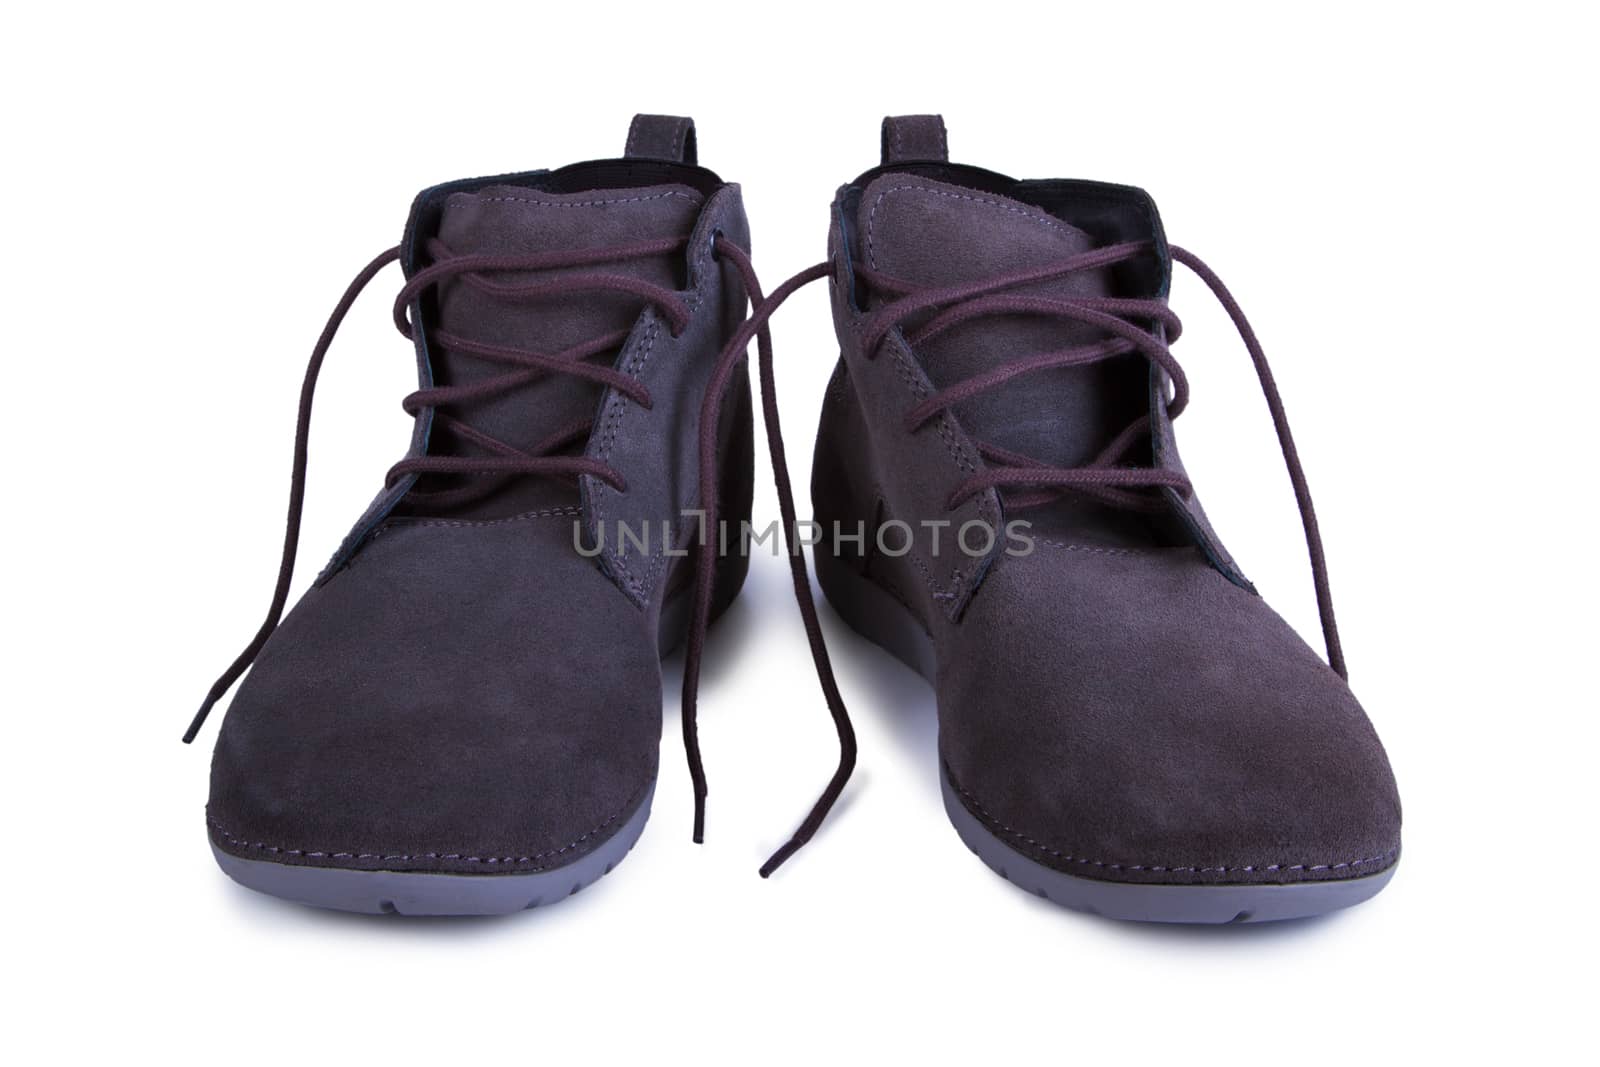 Gray boots isolated on white background - Stock Images